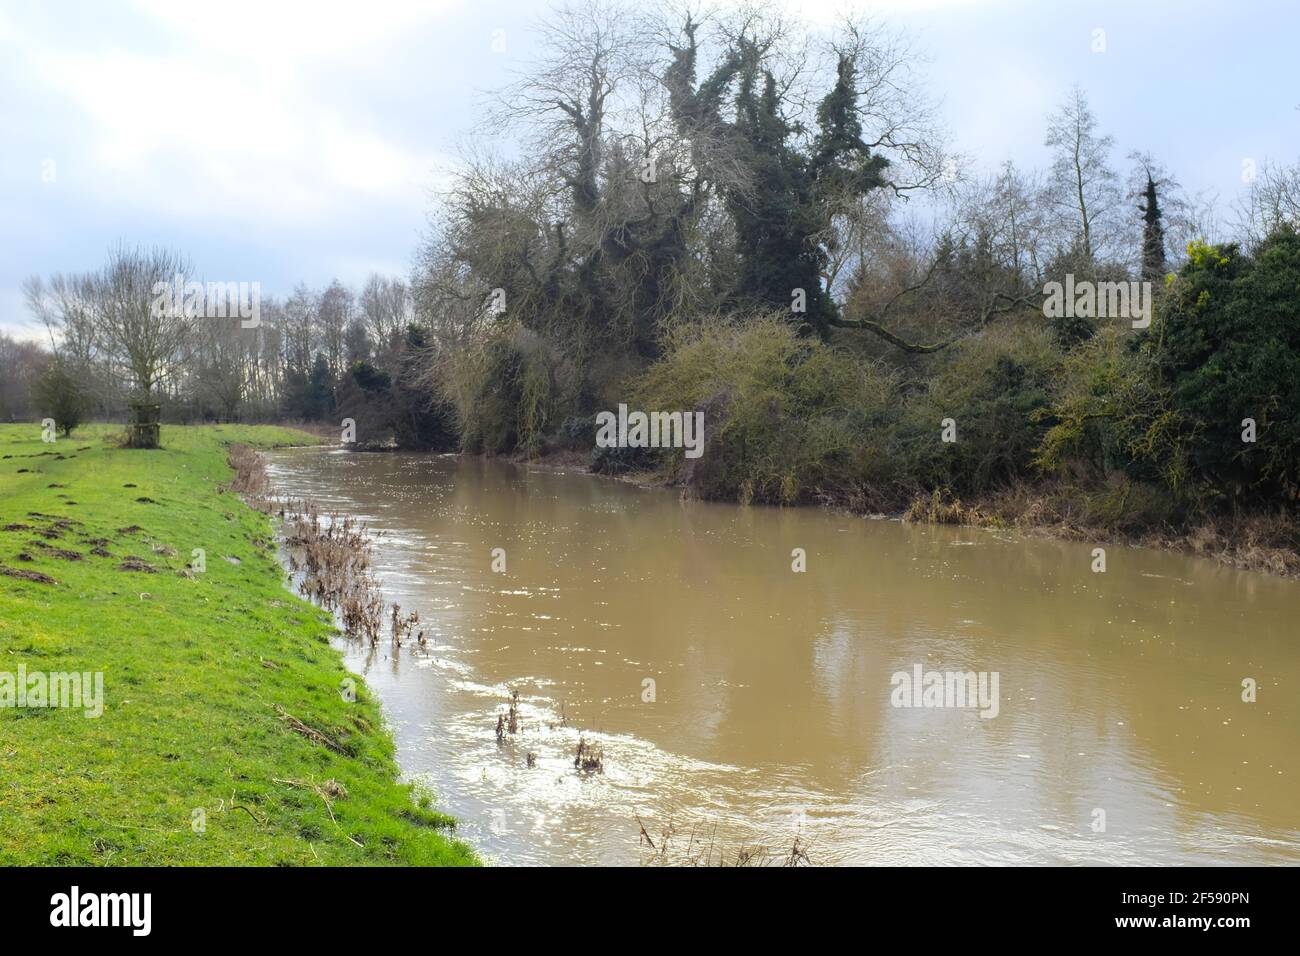 The river Ivel in Biggleswade Bedfordshire, England Stock Photo